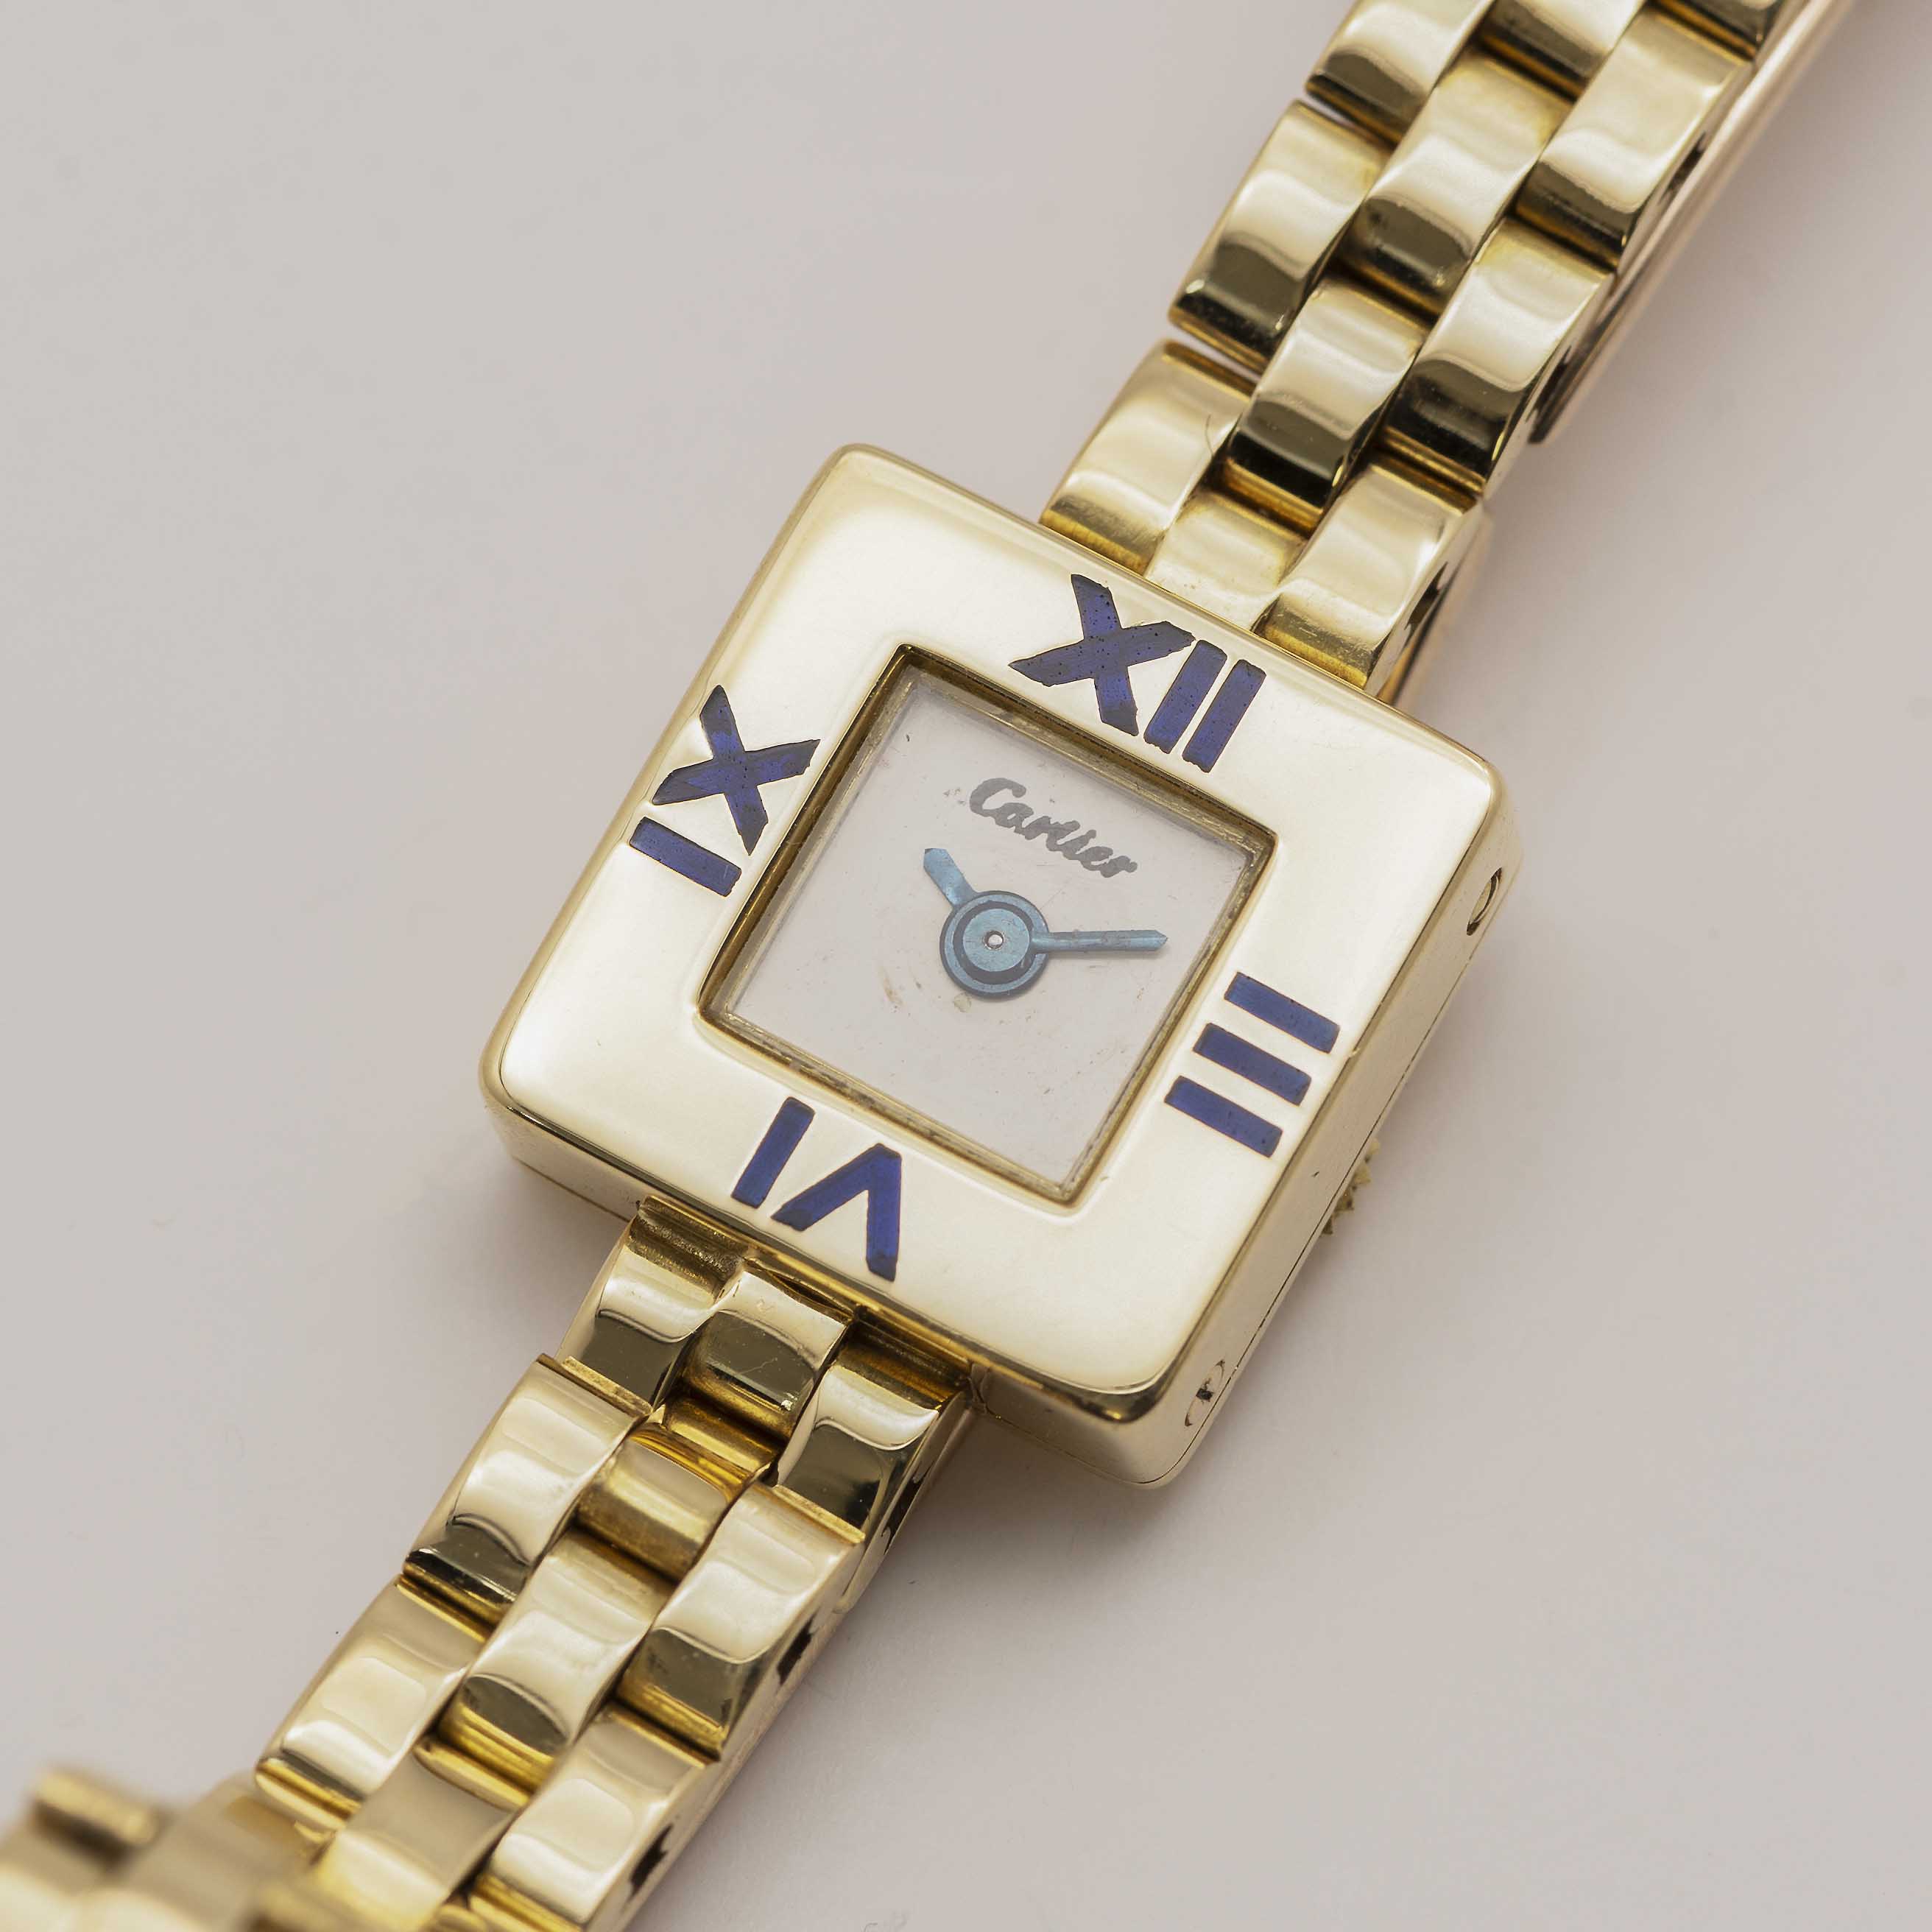 A RARE LADIES 18K SOLID GOLD CARTIER LONDON QUADRANT BRACELET WATCH CIRCA 1970, WITH MATCHING LONDON - Image 6 of 12